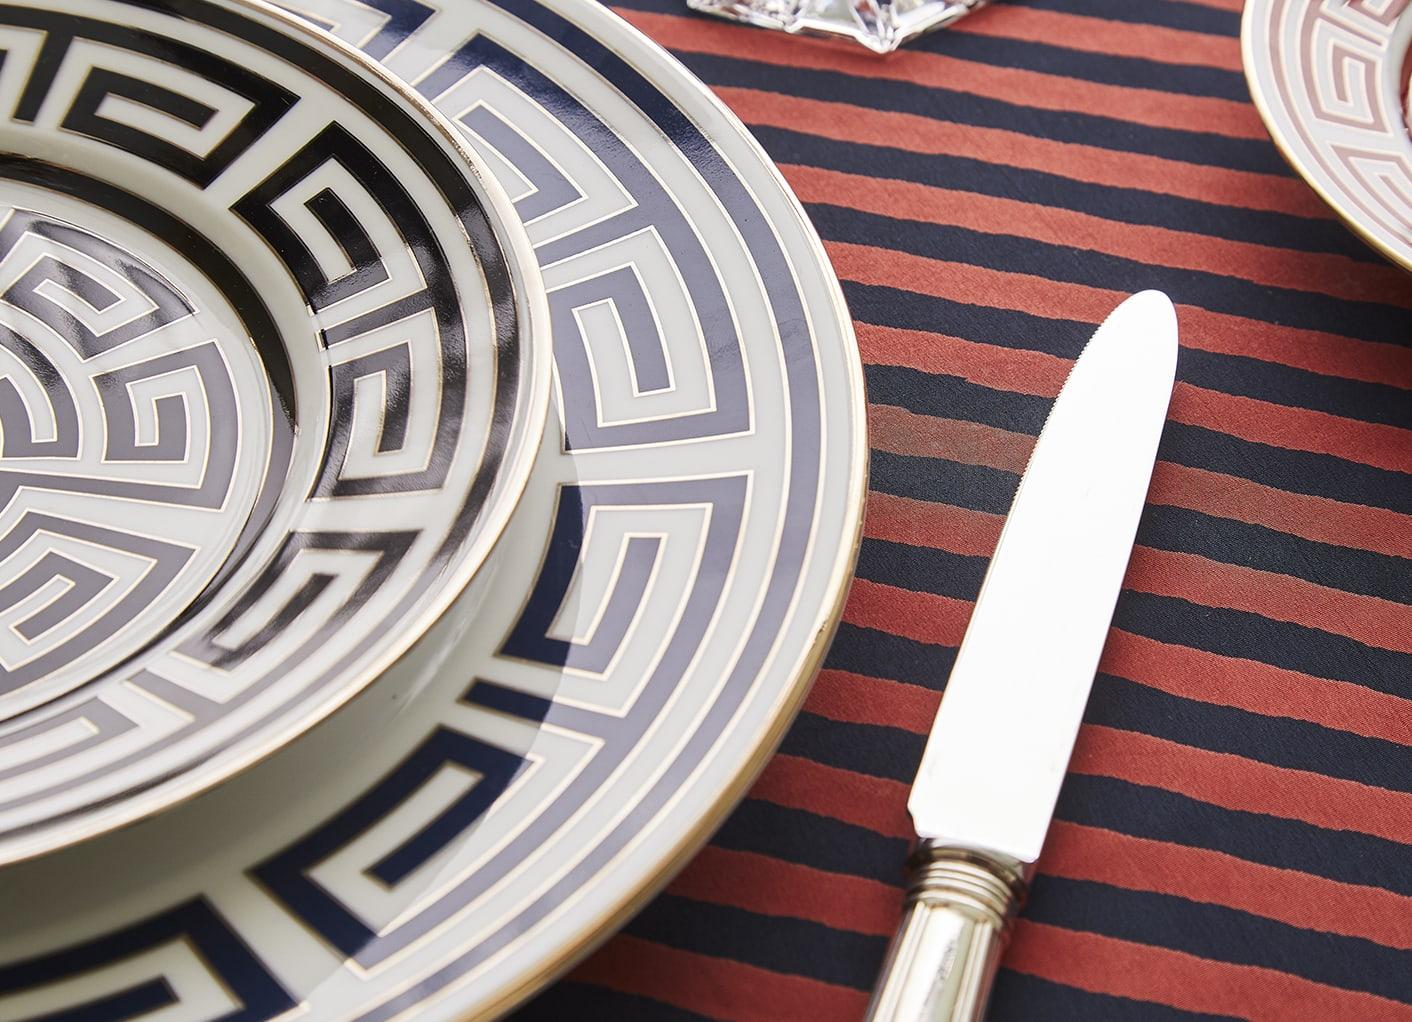 This stunning set of six dinner plates is elegant and modern, boasting a striking decoration designed by iconic master Gio Ponti in 1926. Part of the Labirinto collection, which means maze in Italian, the decoration features a geometric pattern in a